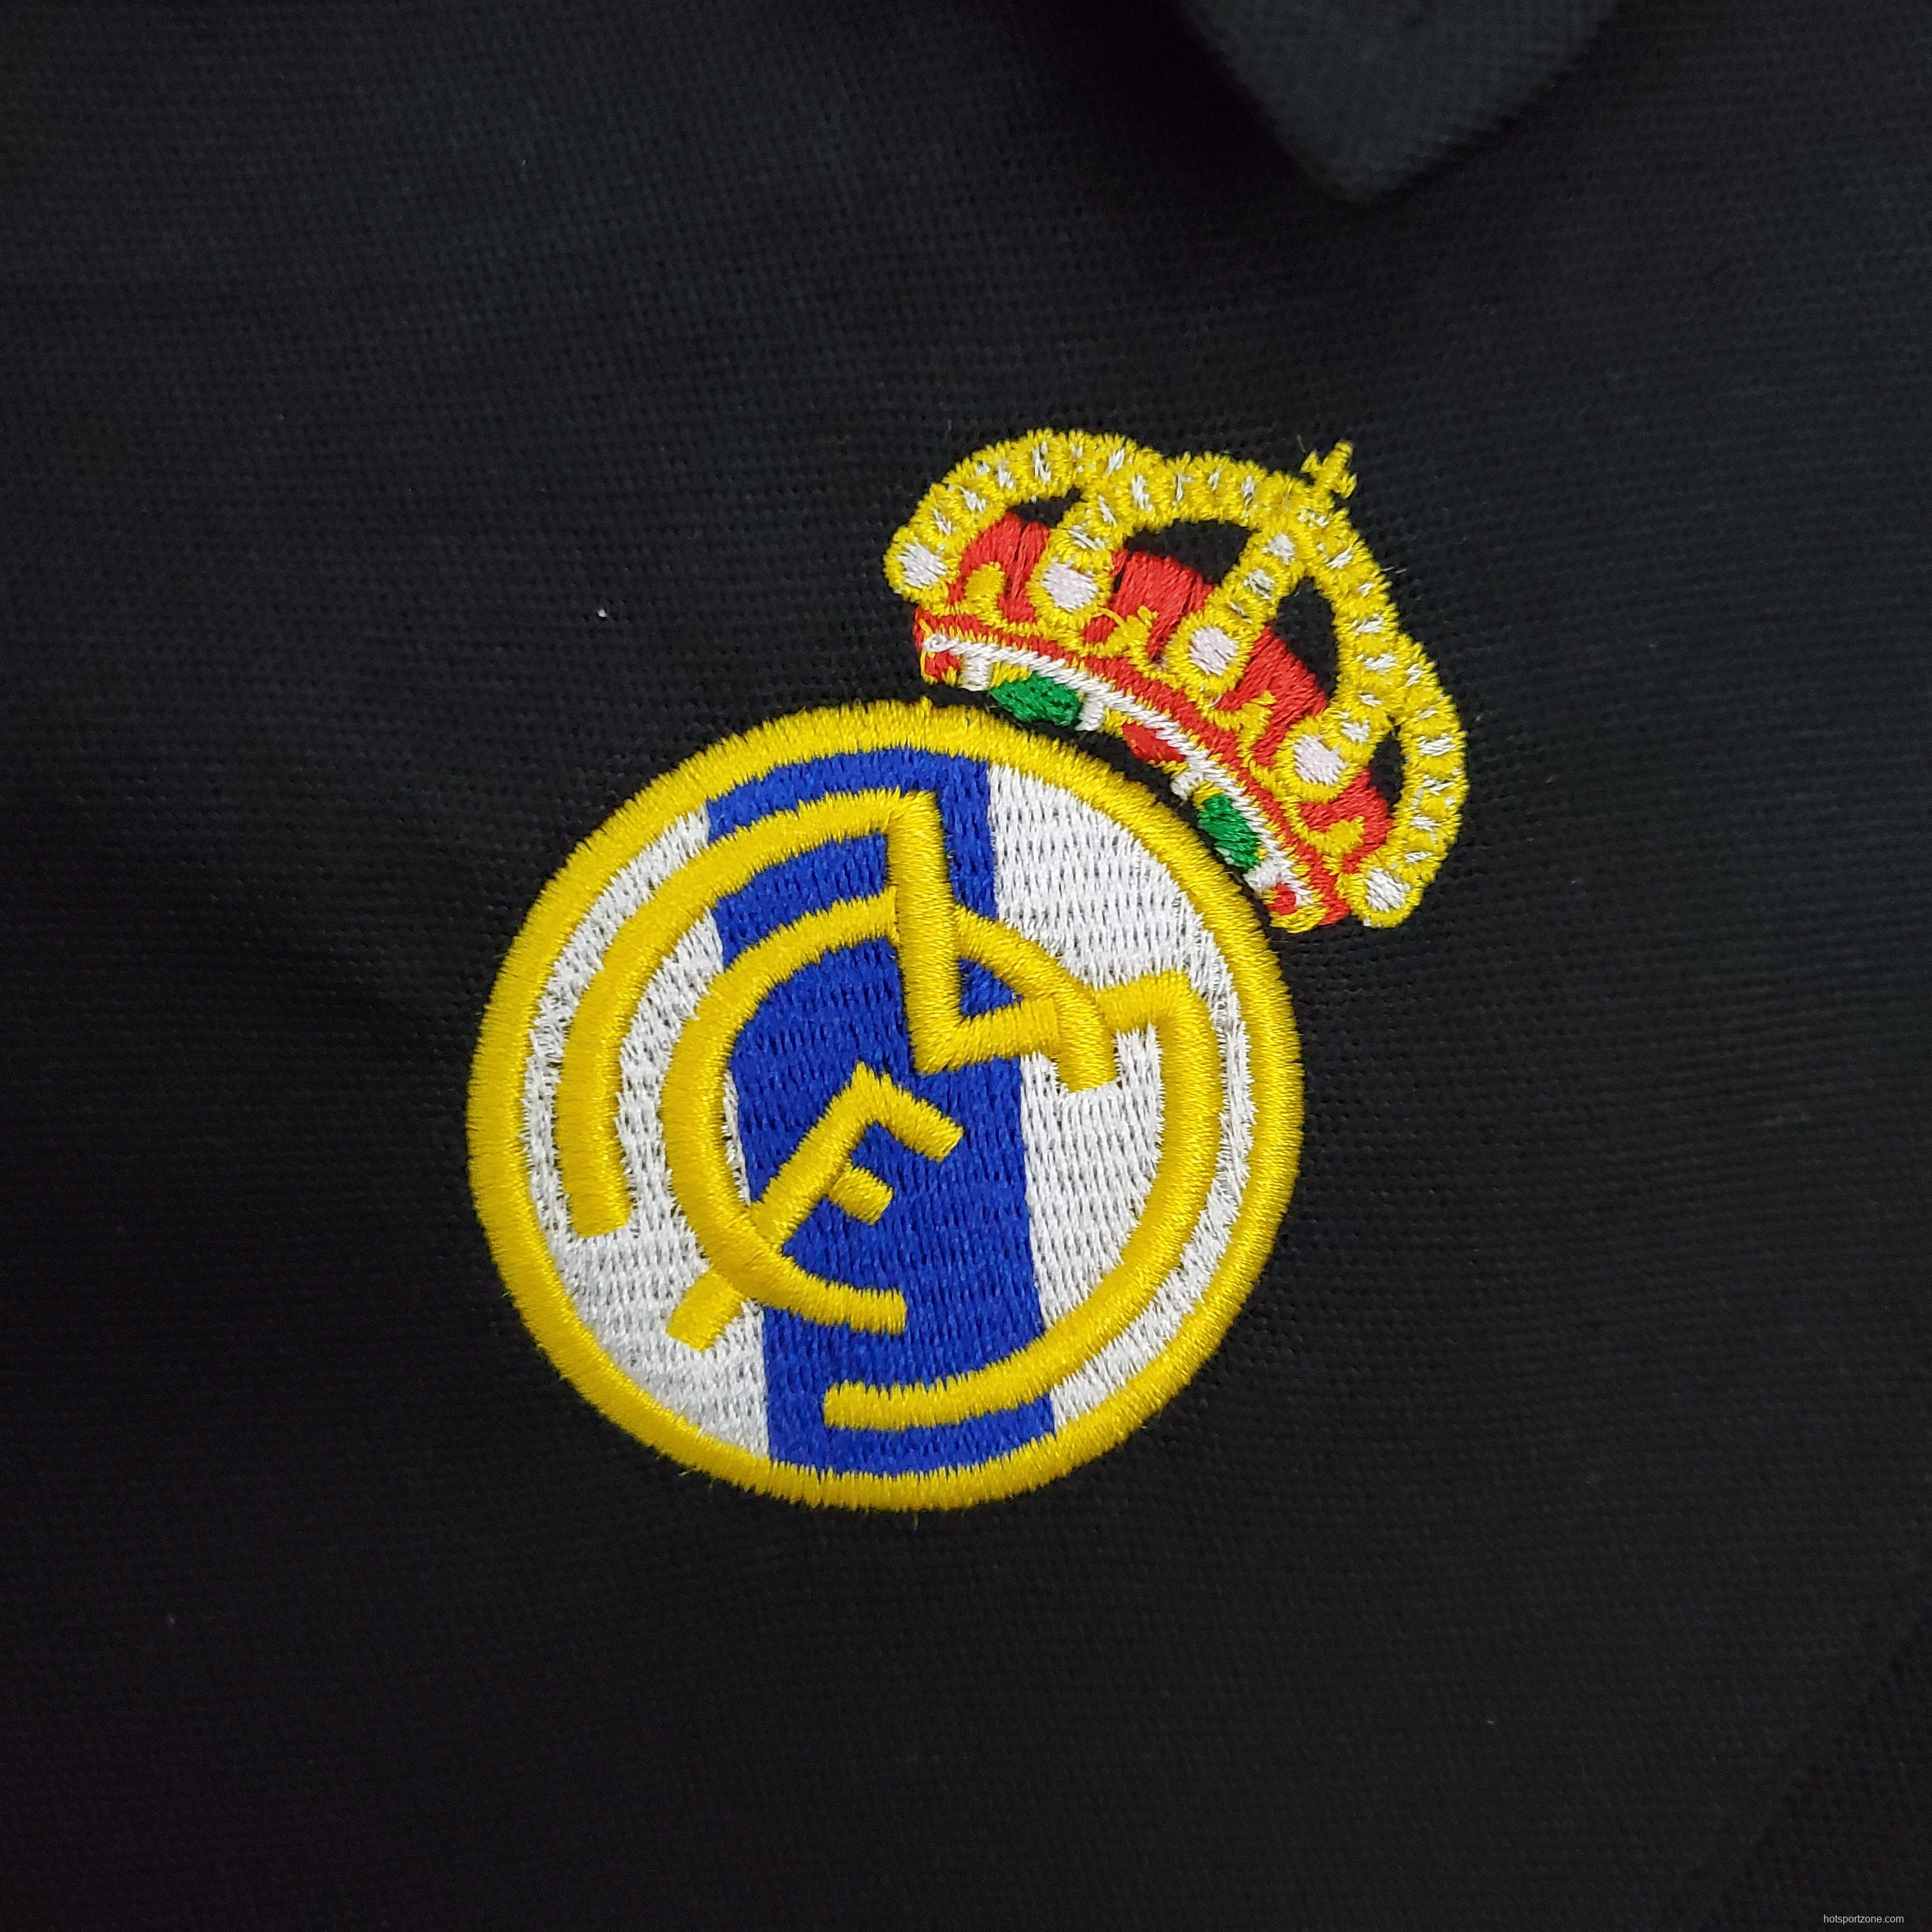 Retro Real Madrid 02/03 Champions League Away Soccer Jersey